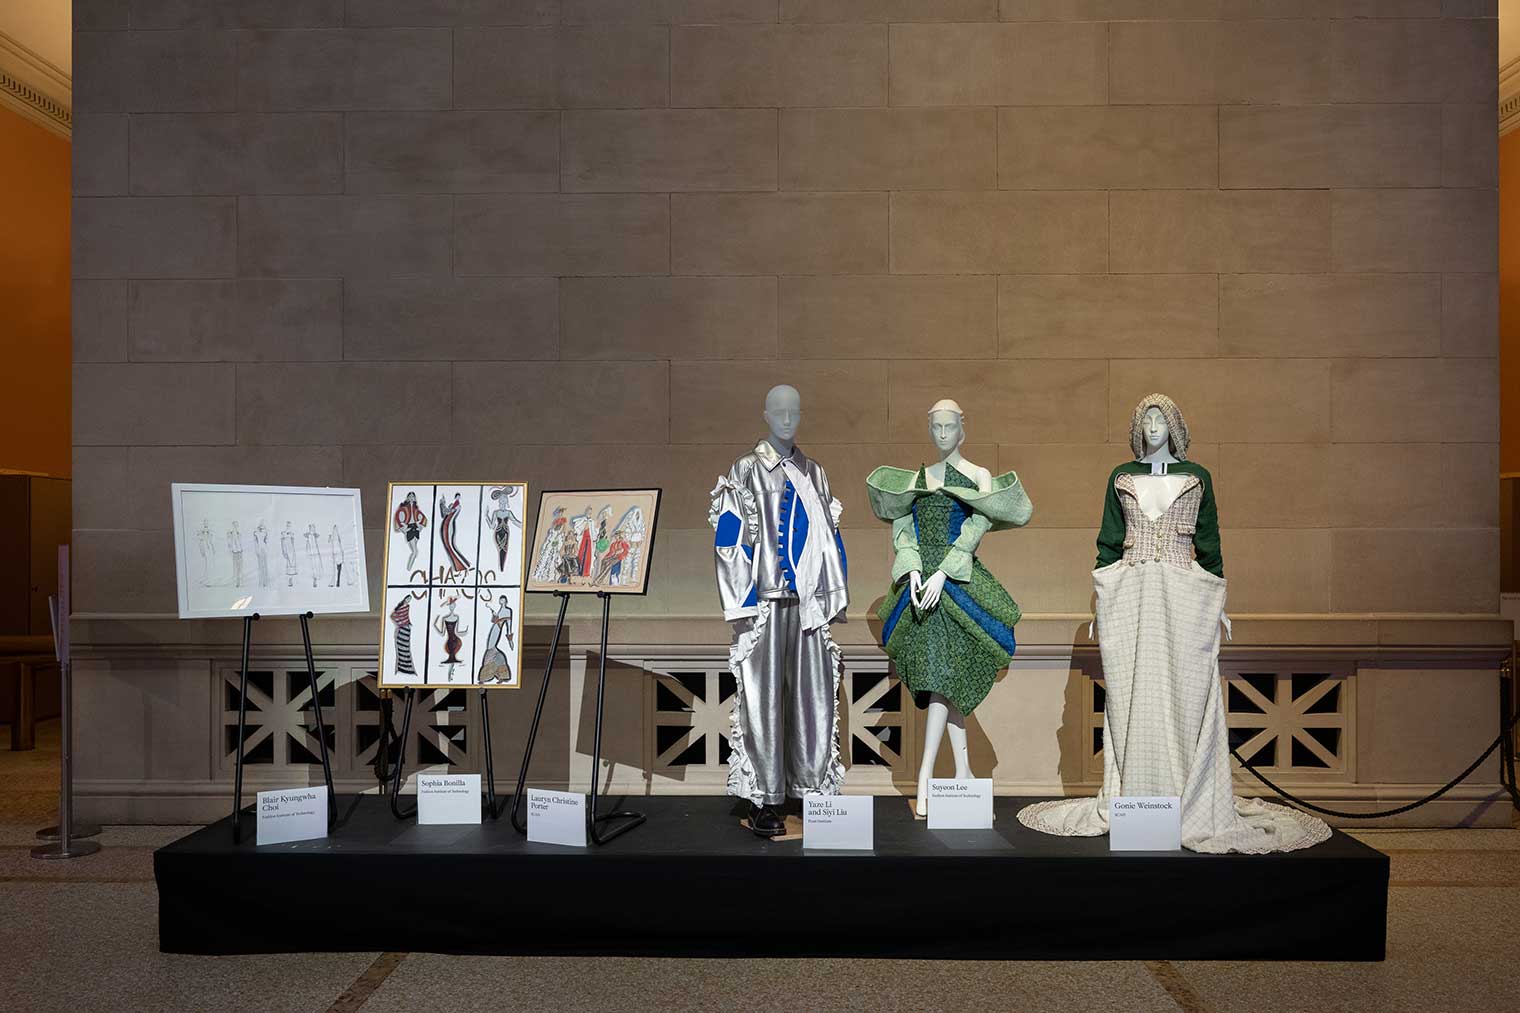 Several mannequins sporting fashions designs are displayed on a raised platform.